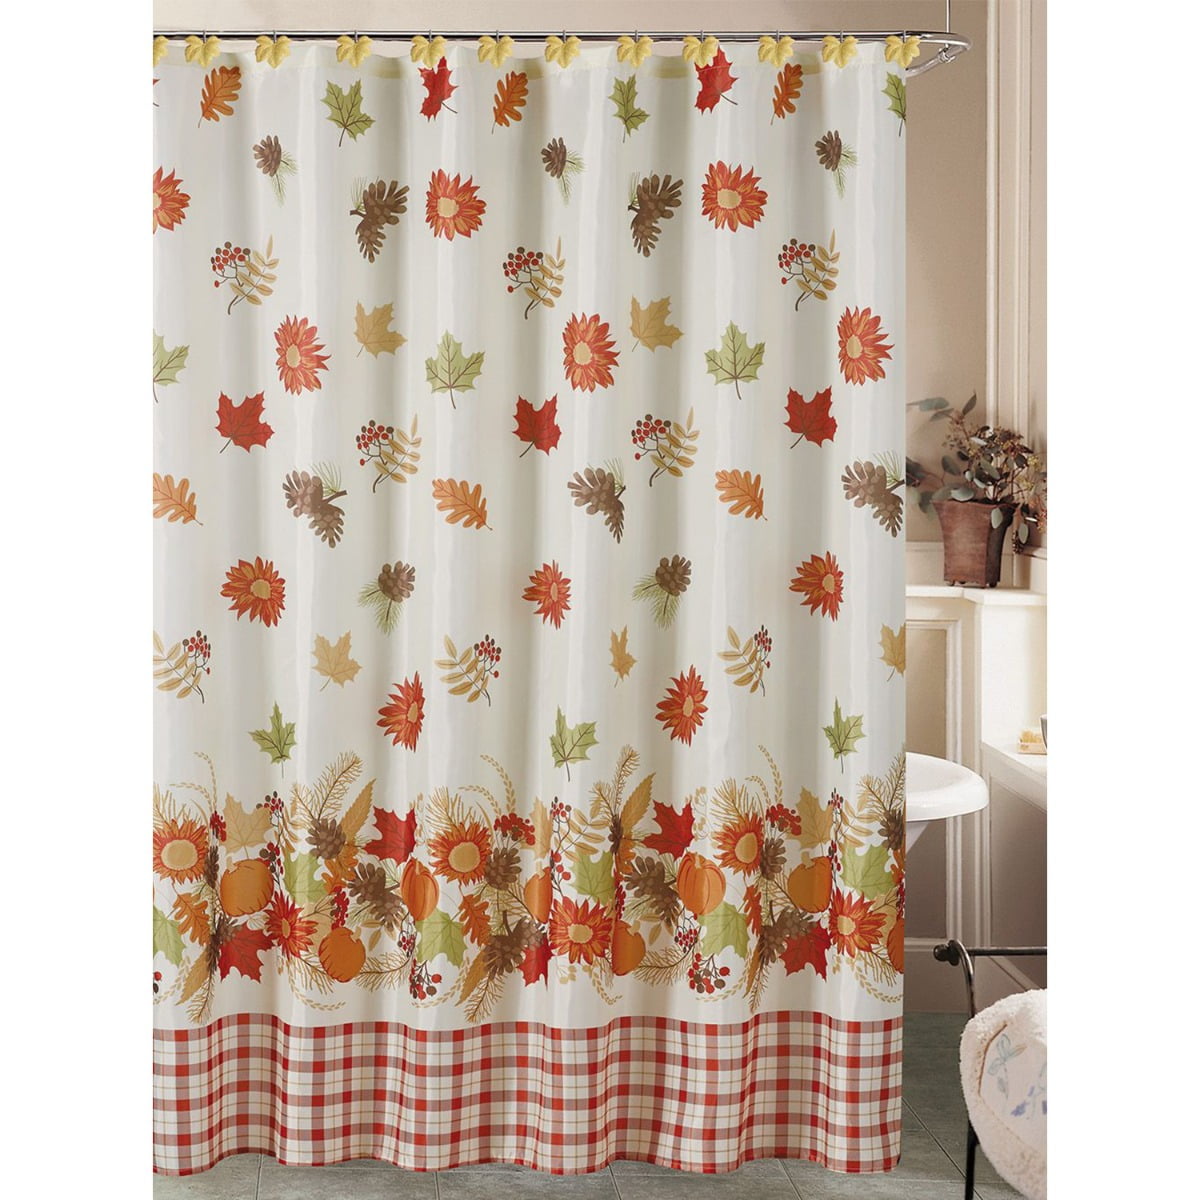 Details about   Autumn Shower Curtain Golden Fall Leaves Bath Curtain Sets 71x71 Inches 